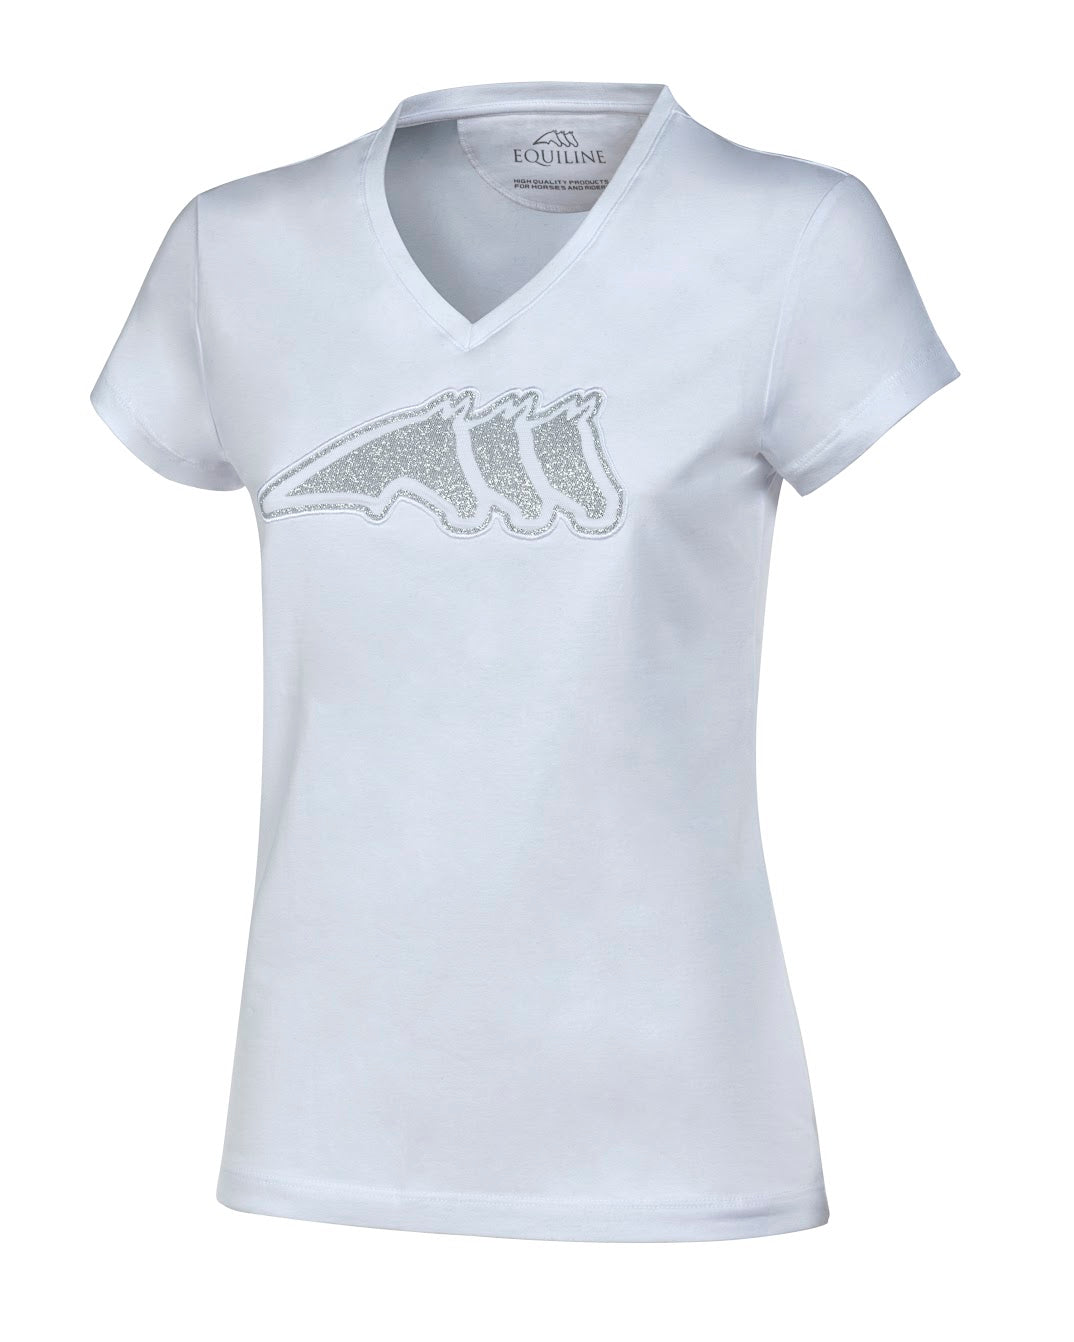 The Equiline glitter print three horse logo T shirt is perfect for the yard or at shows. Slim fitting with a v neck and is made from luxury cotton elastase stretch jersey.  Machine washable 